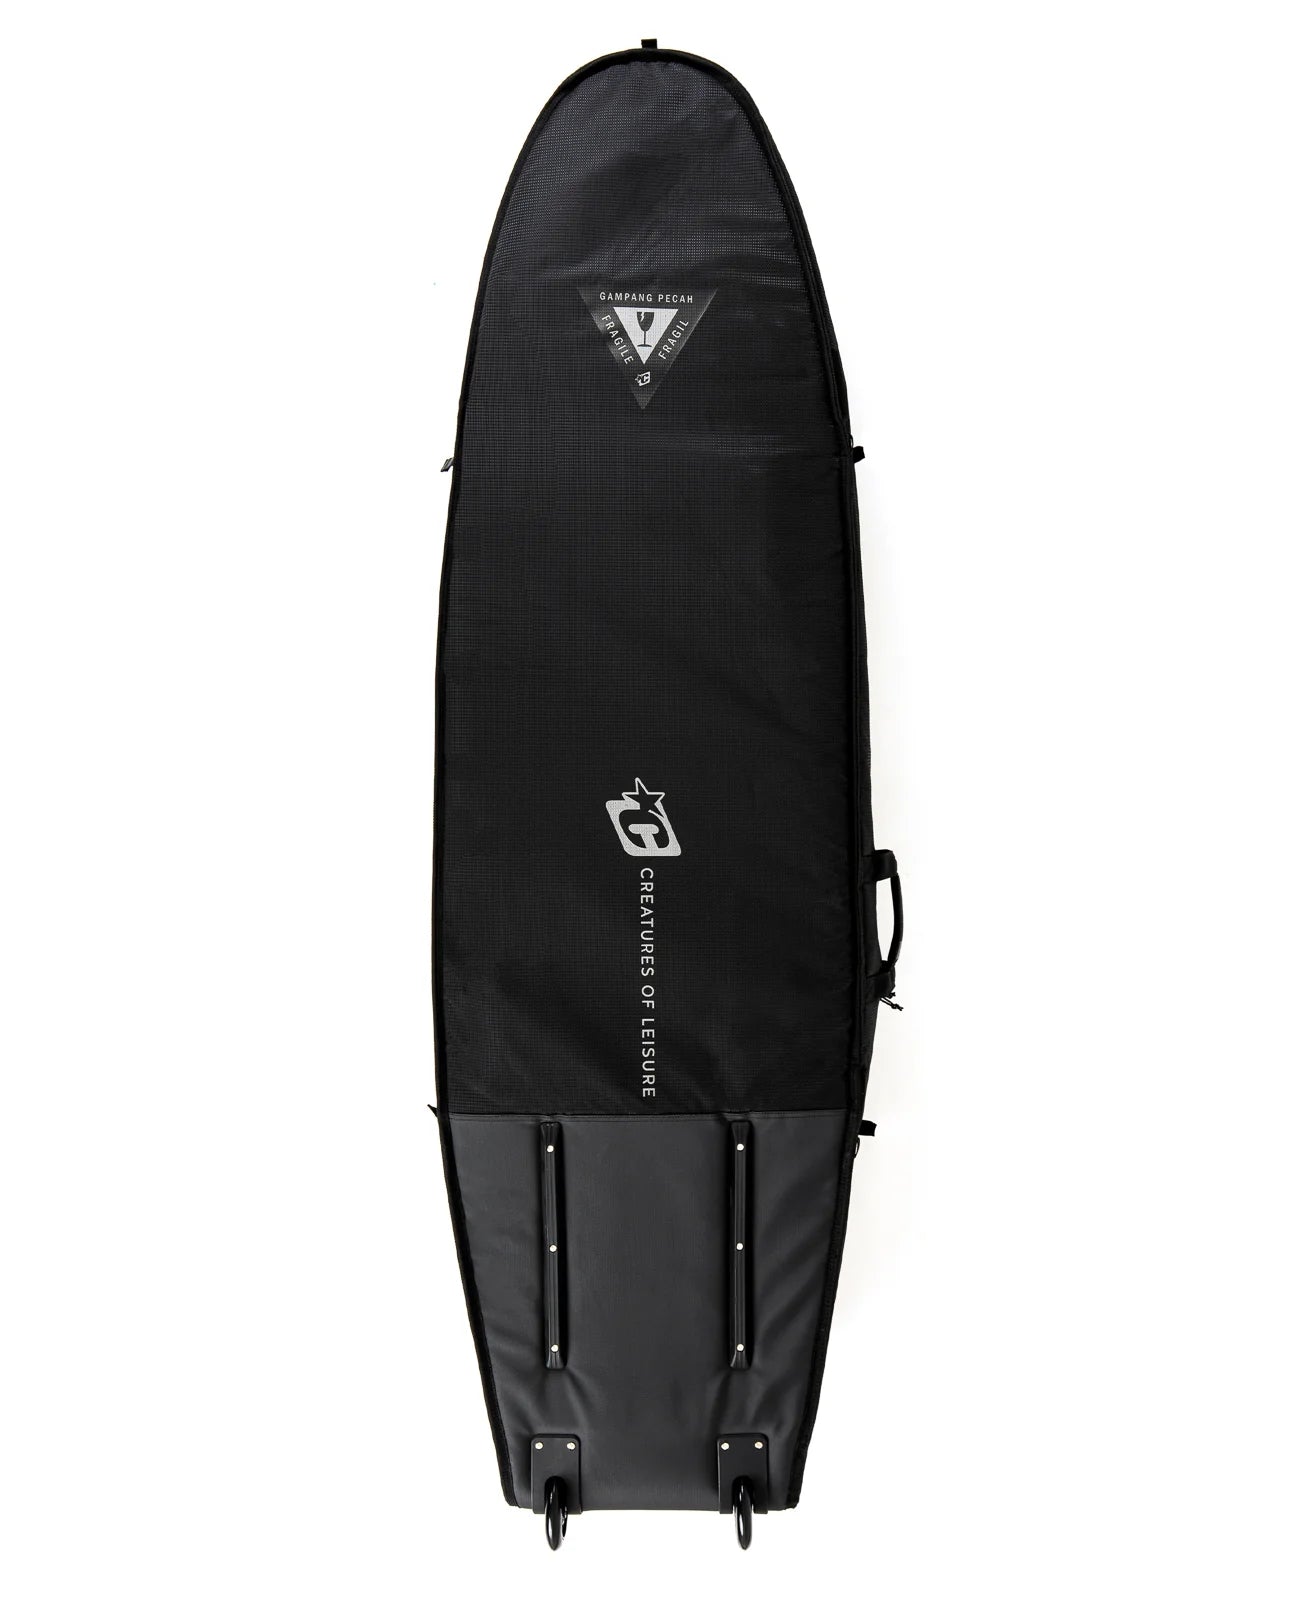 FUNBOARD ALL ROUNDER DT2.0 3-4 BOARD WHEELY - BLACK